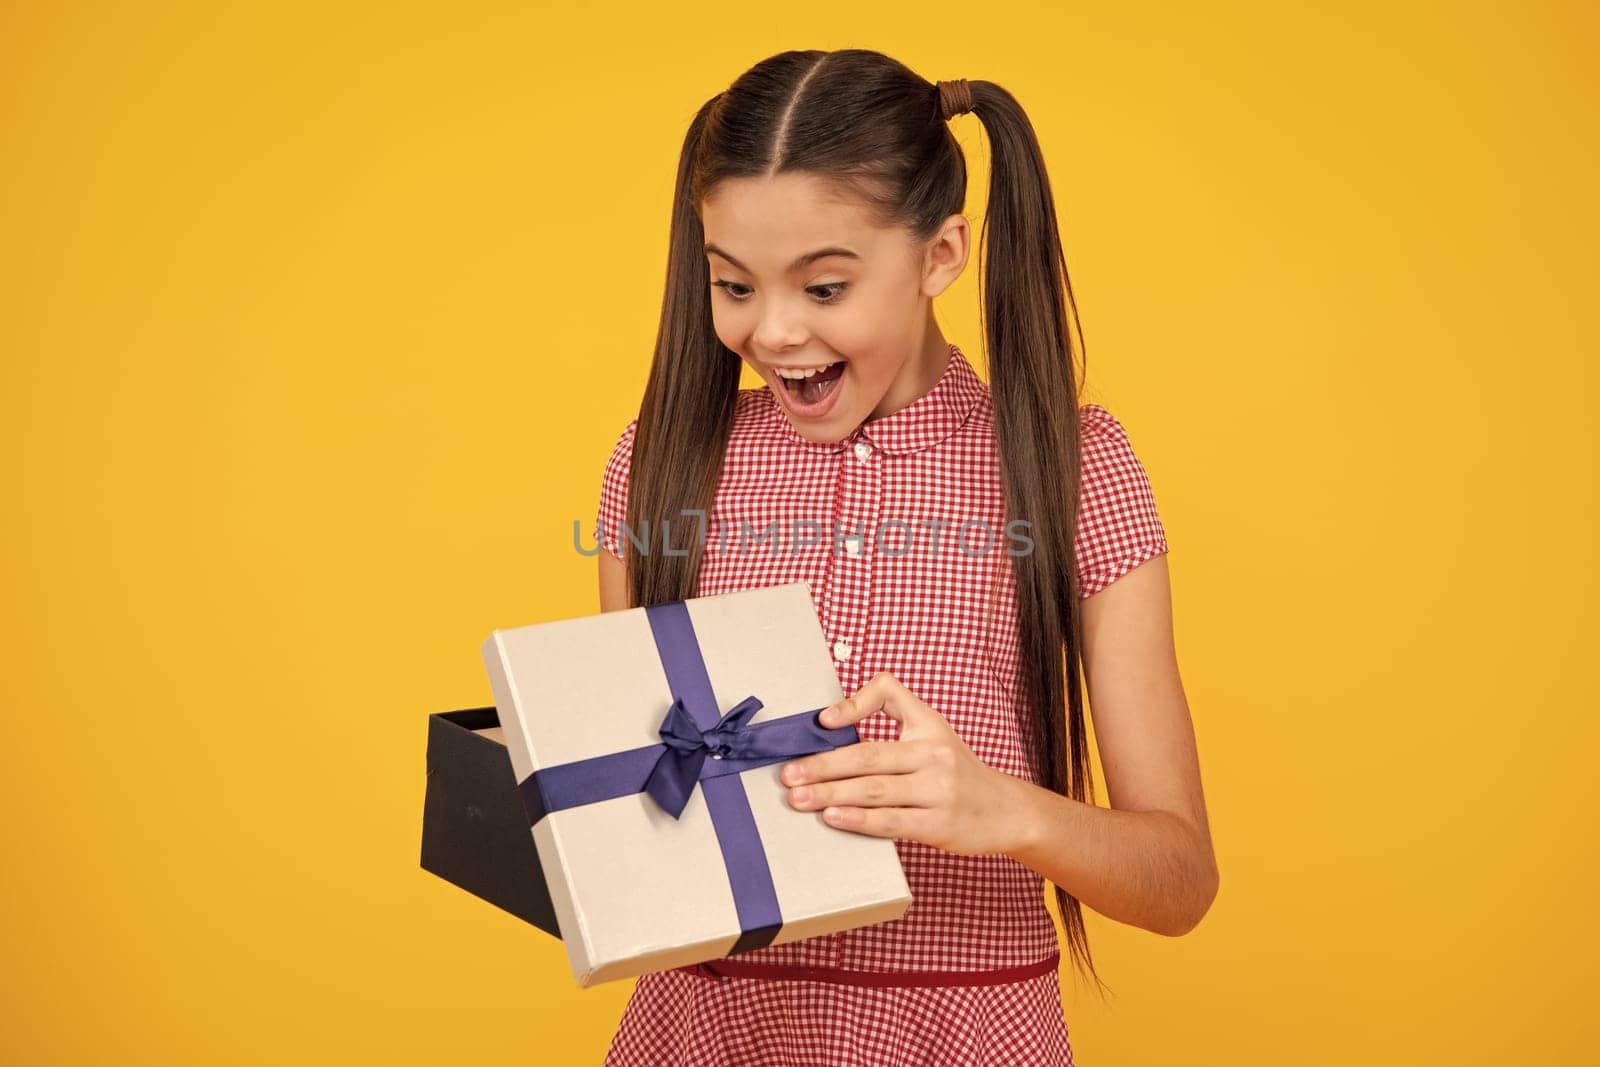 Teenager child with gift box. Present for holidays. Happy birthday, Valentines day, New Year or Christmas. Kid hold present box. Happy teenage girl, positive and smiling emotions